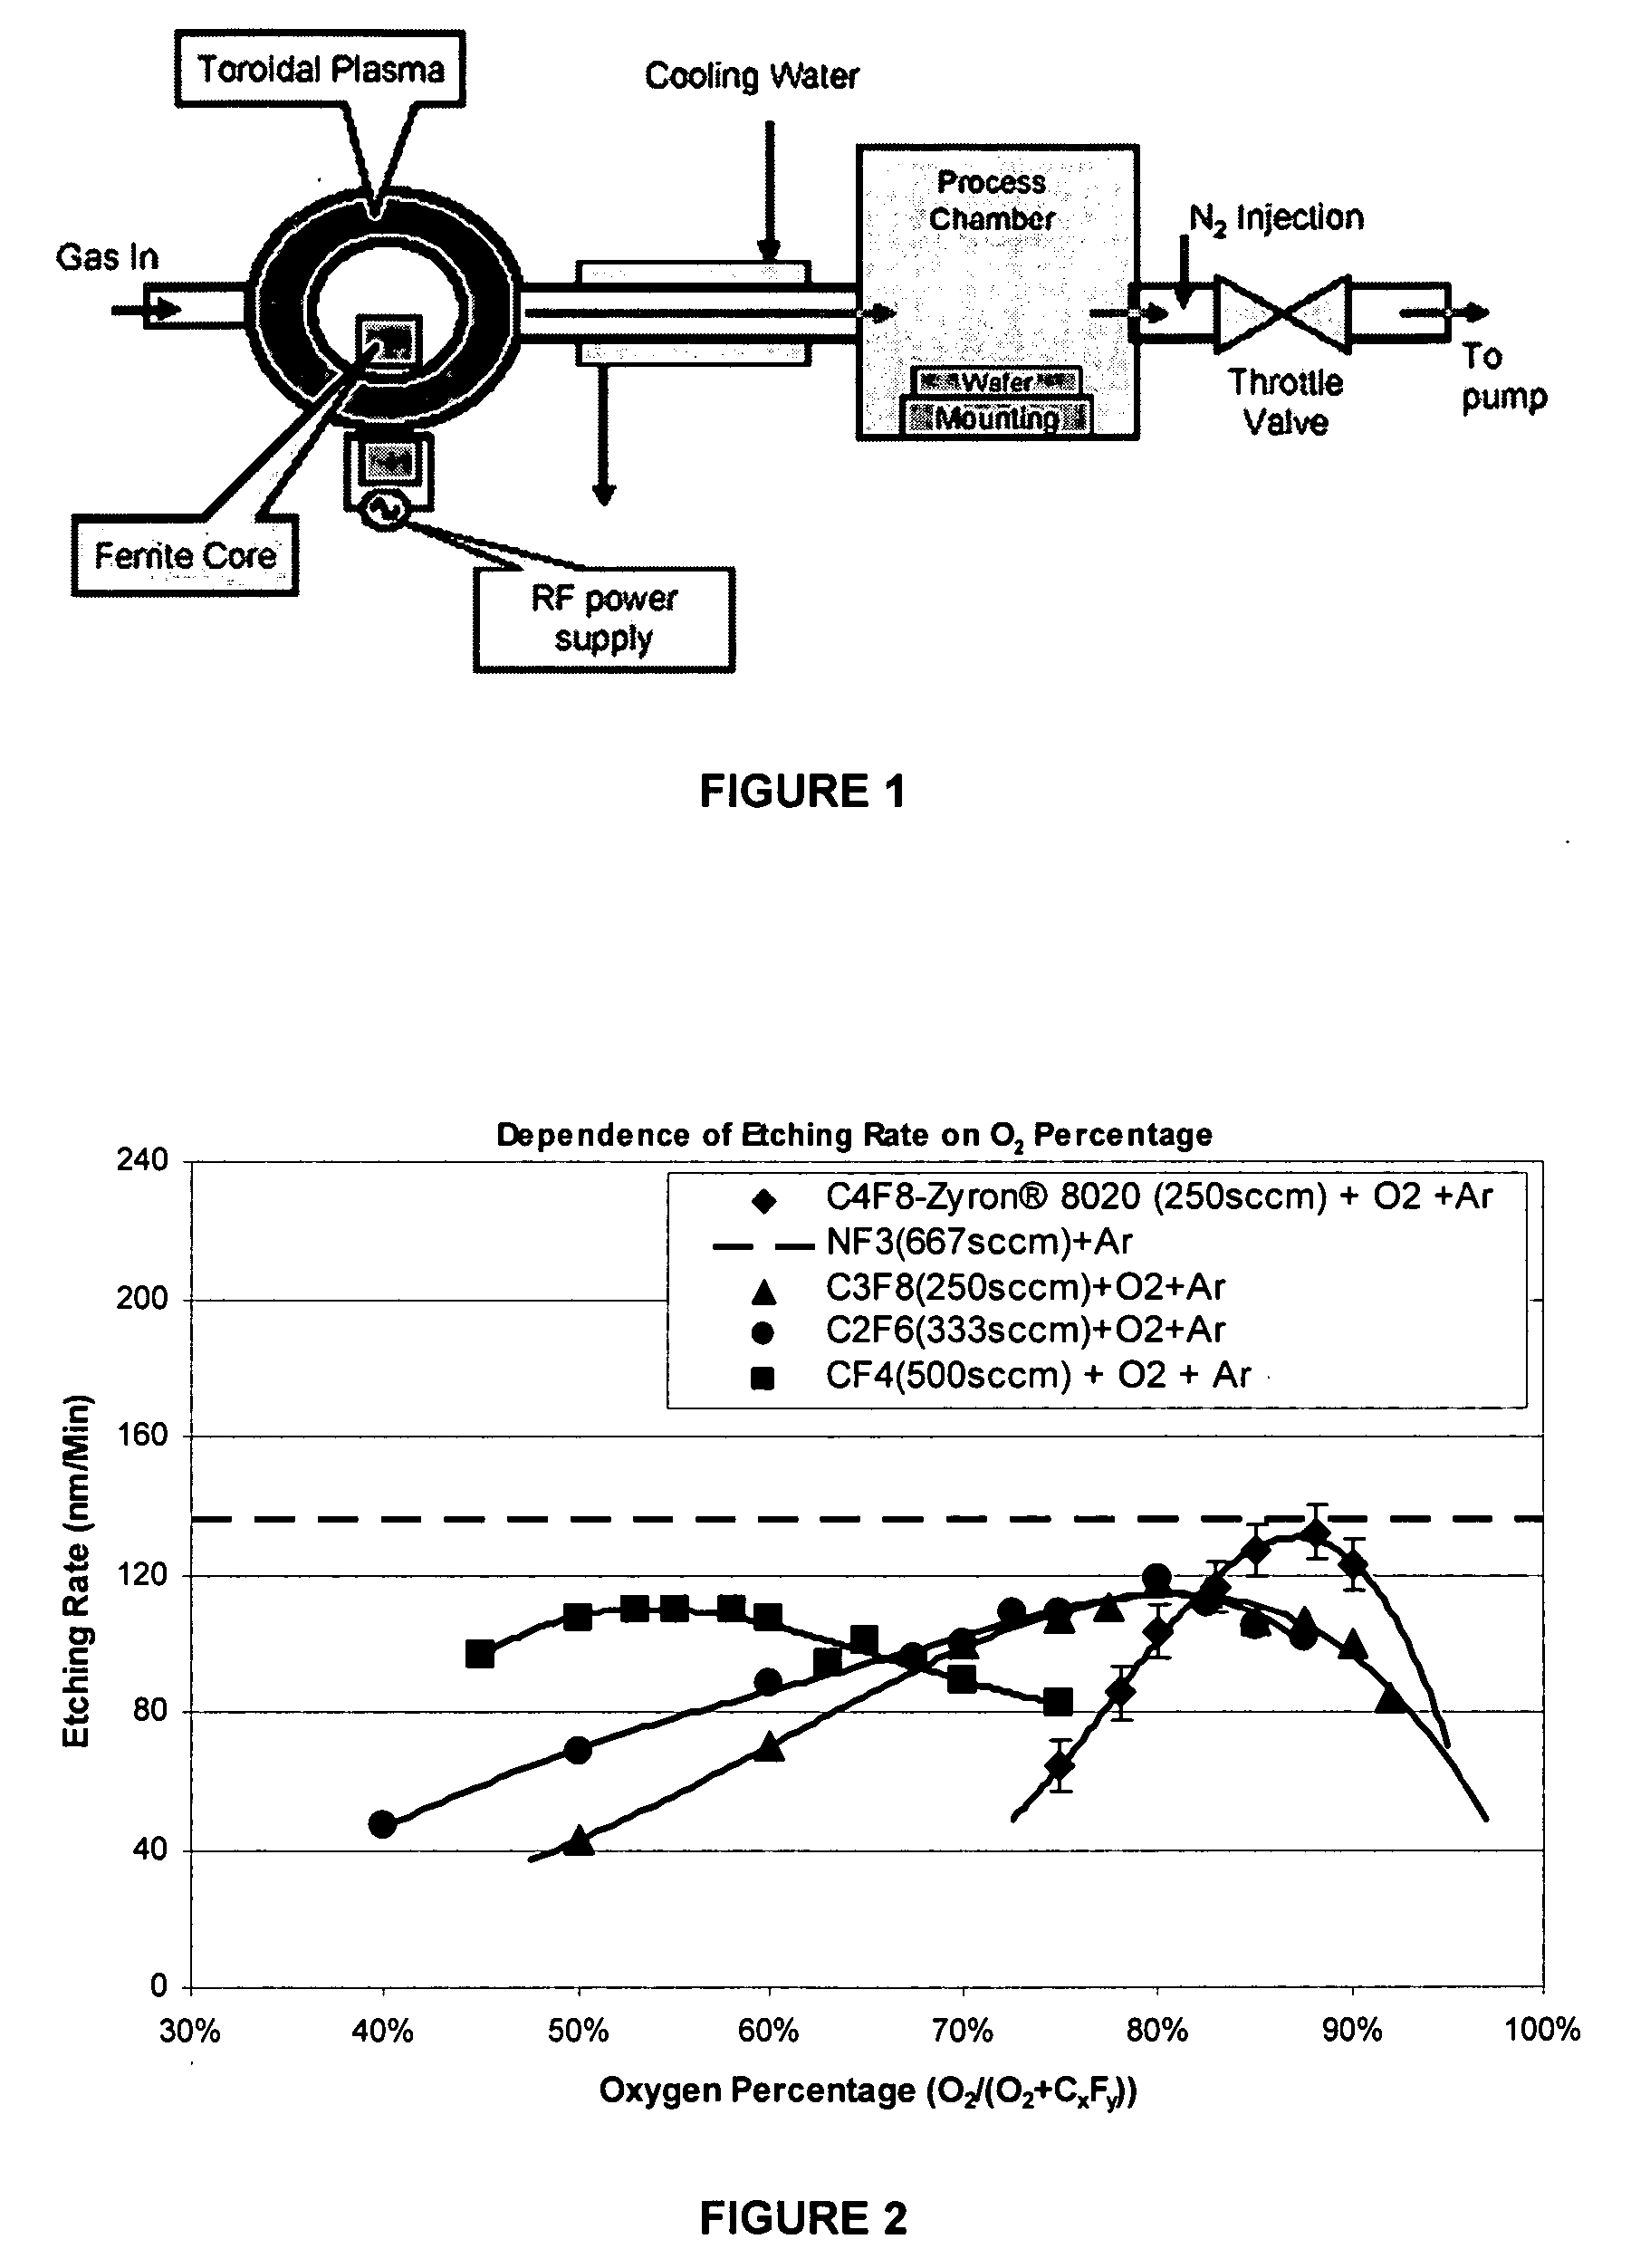 Remote chamber methods for removing surface deposits